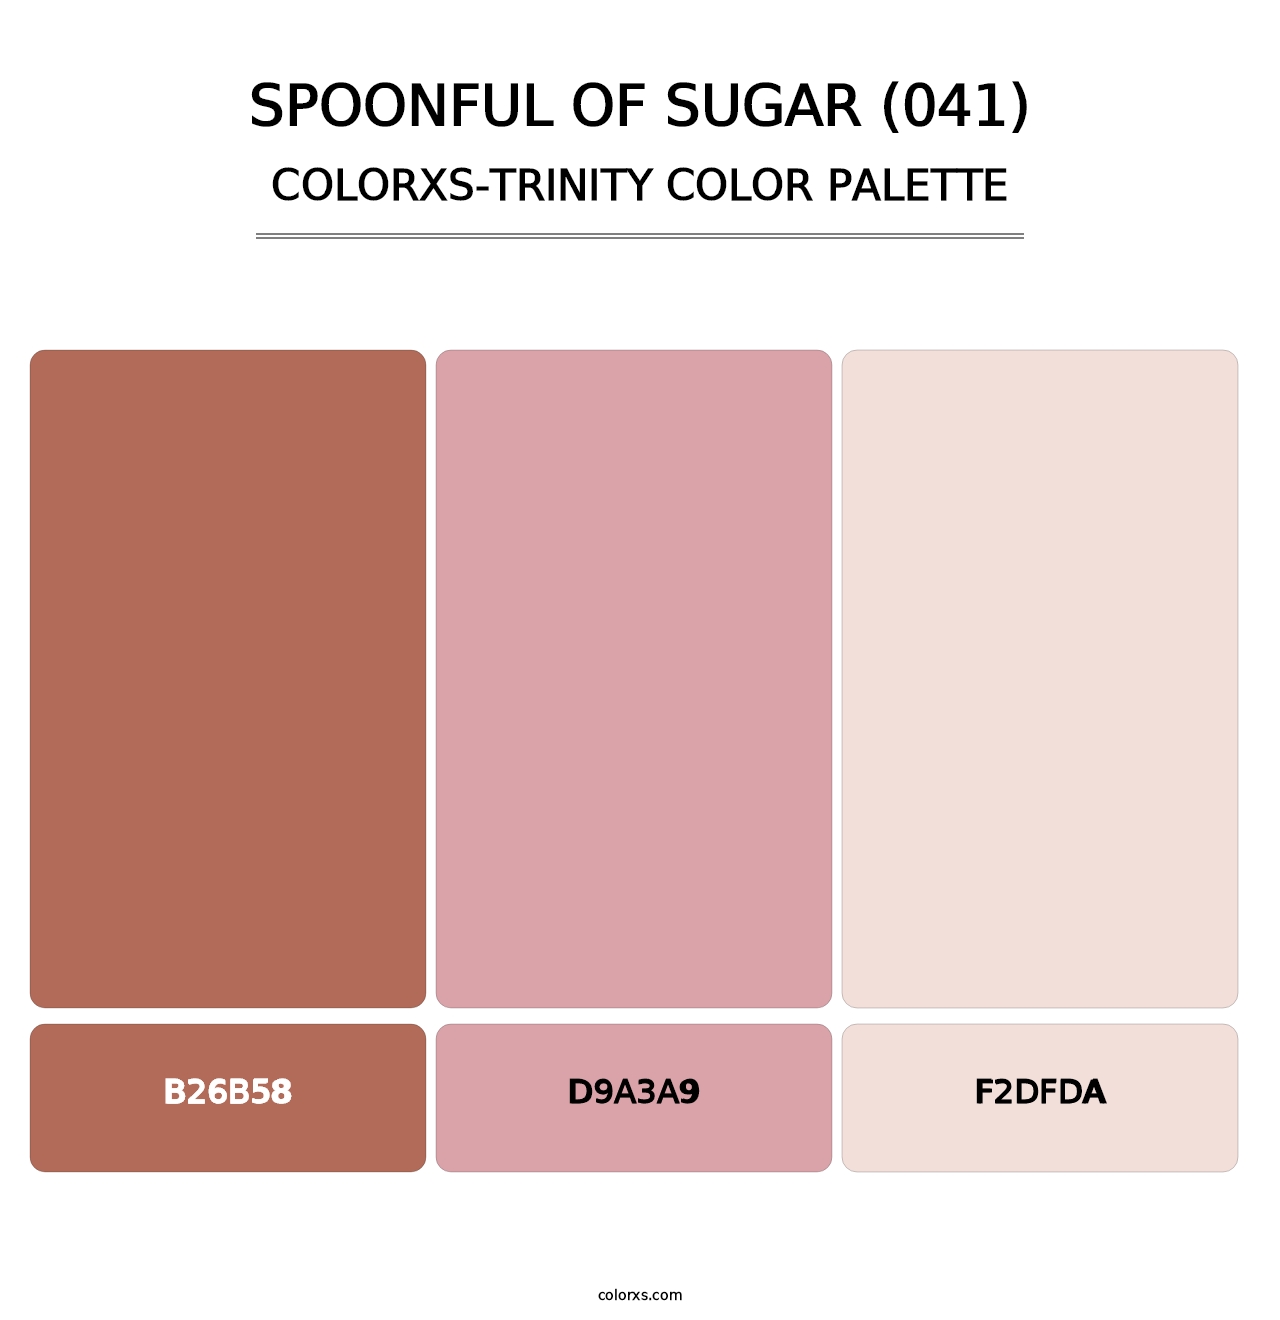 Spoonful of Sugar (041) - Colorxs Trinity Palette